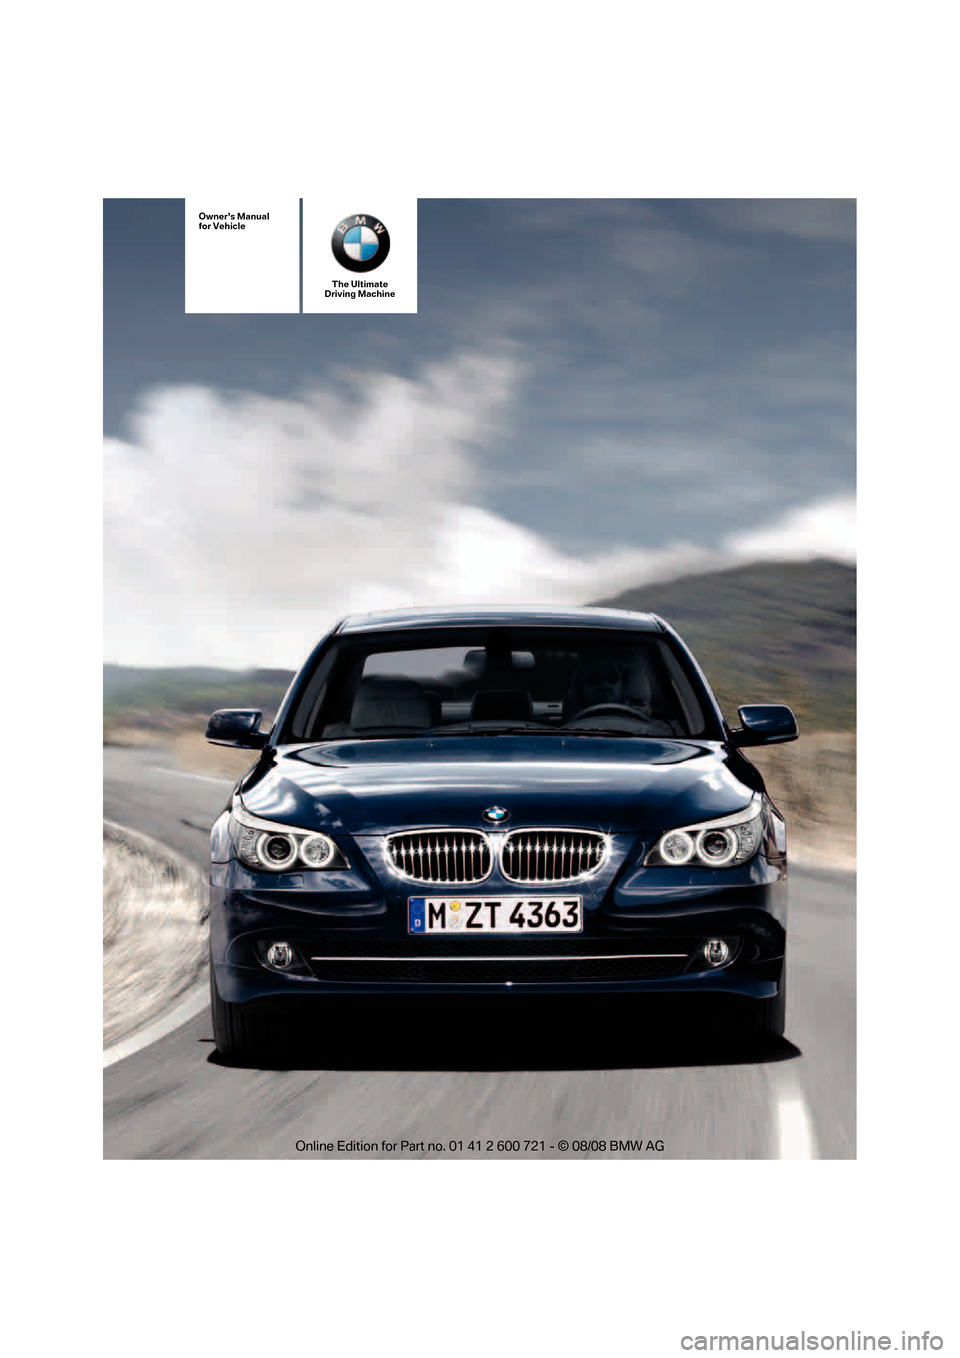 BMW 530XI TOURING 2009 E61 Owners Manual The Ultimate
Driving Machine
Owners Manual
for Vehicle 